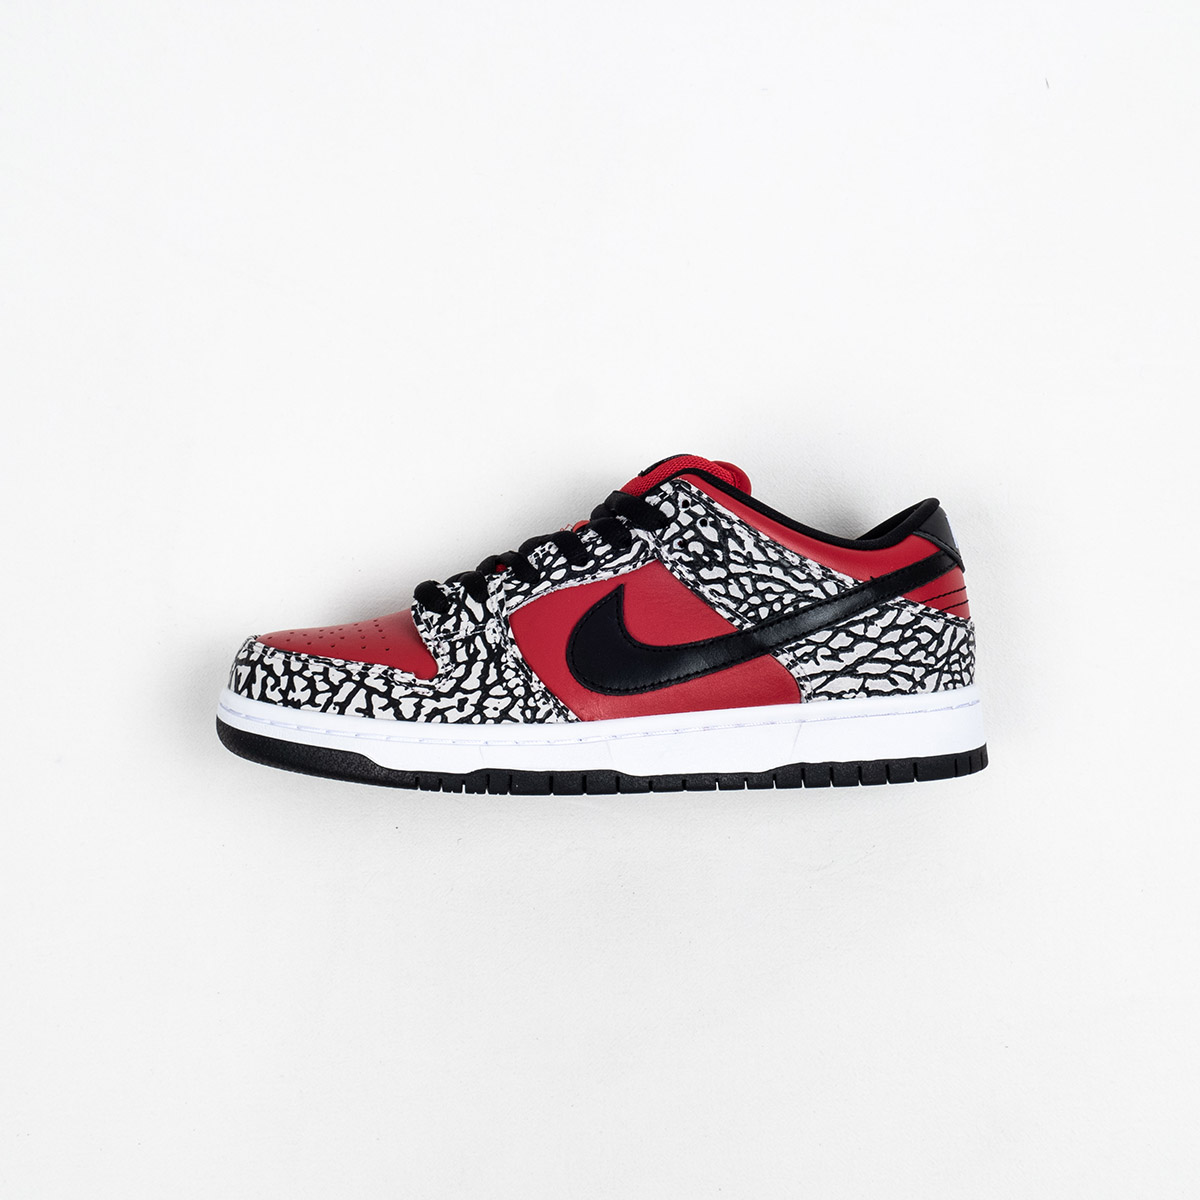 Supreme x Nike SB Dunk Low “Red Cement” For Sale – Sneaker Hello